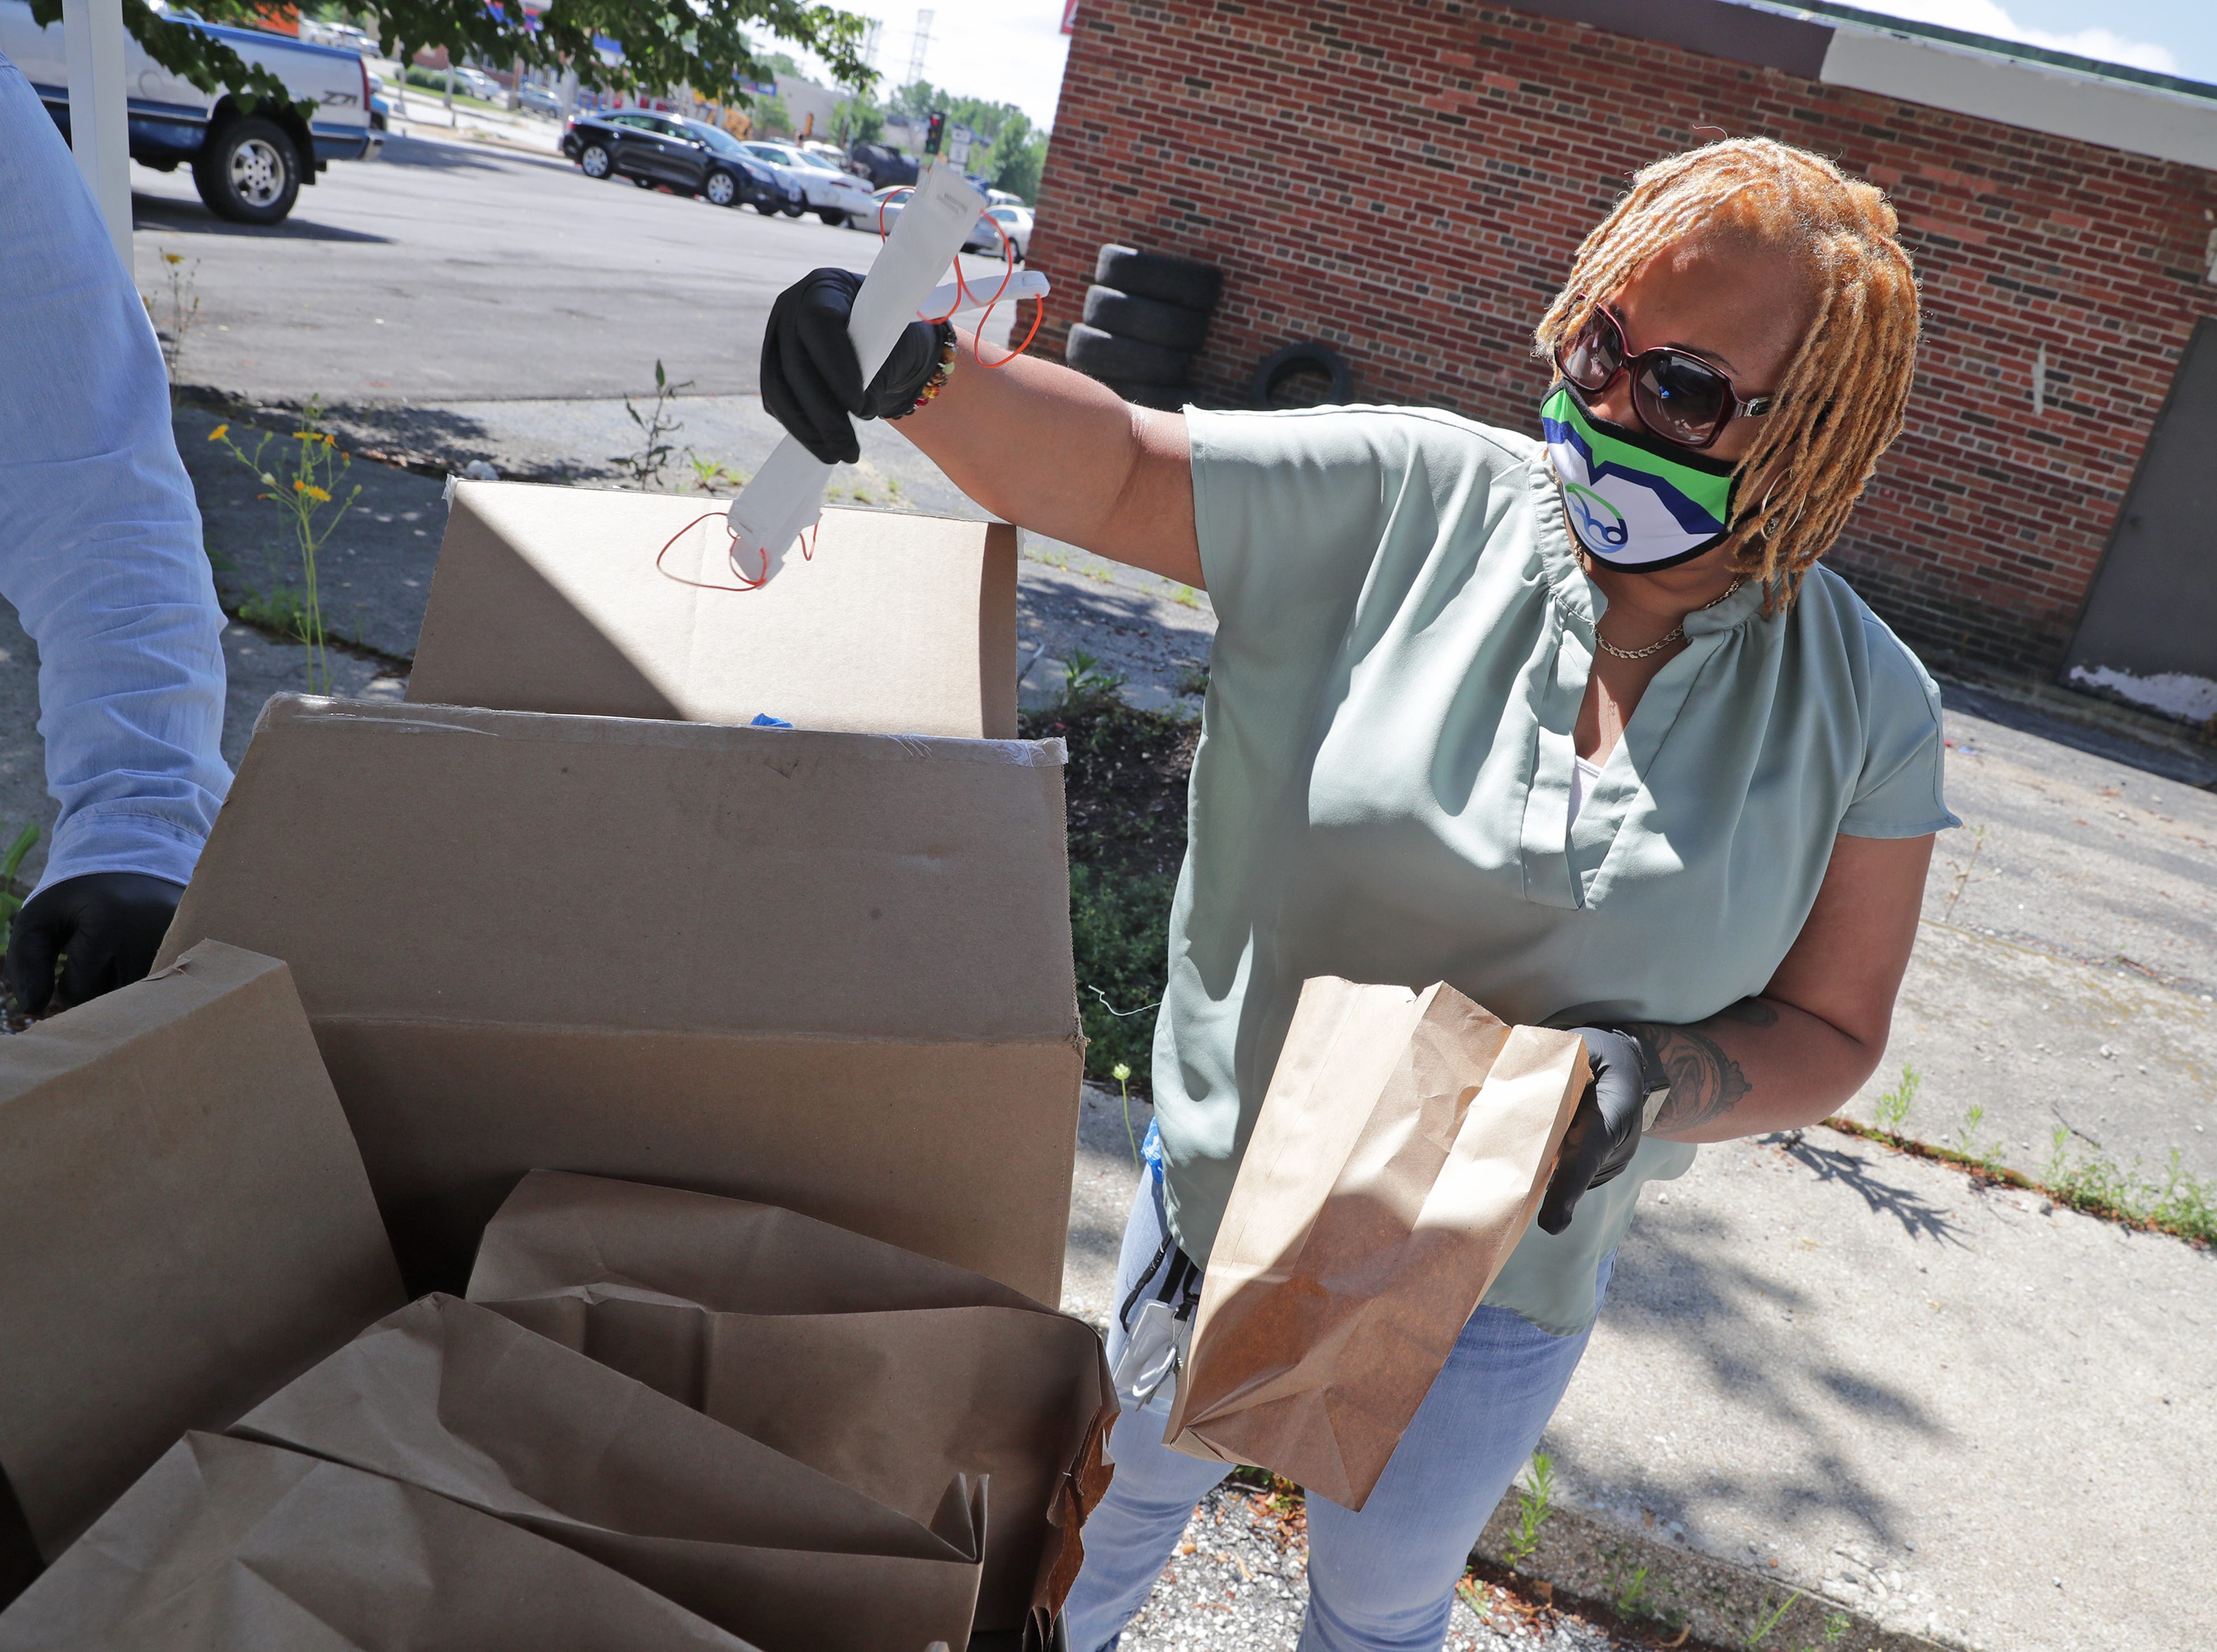 Erica Swan, with the Milwaukee Health Department, prepares bags with face masks before handing them out at the City Of Milwaukee Health Department-Northwest Health Center at 7630 W. Mill Road Milwaukee on July 16.